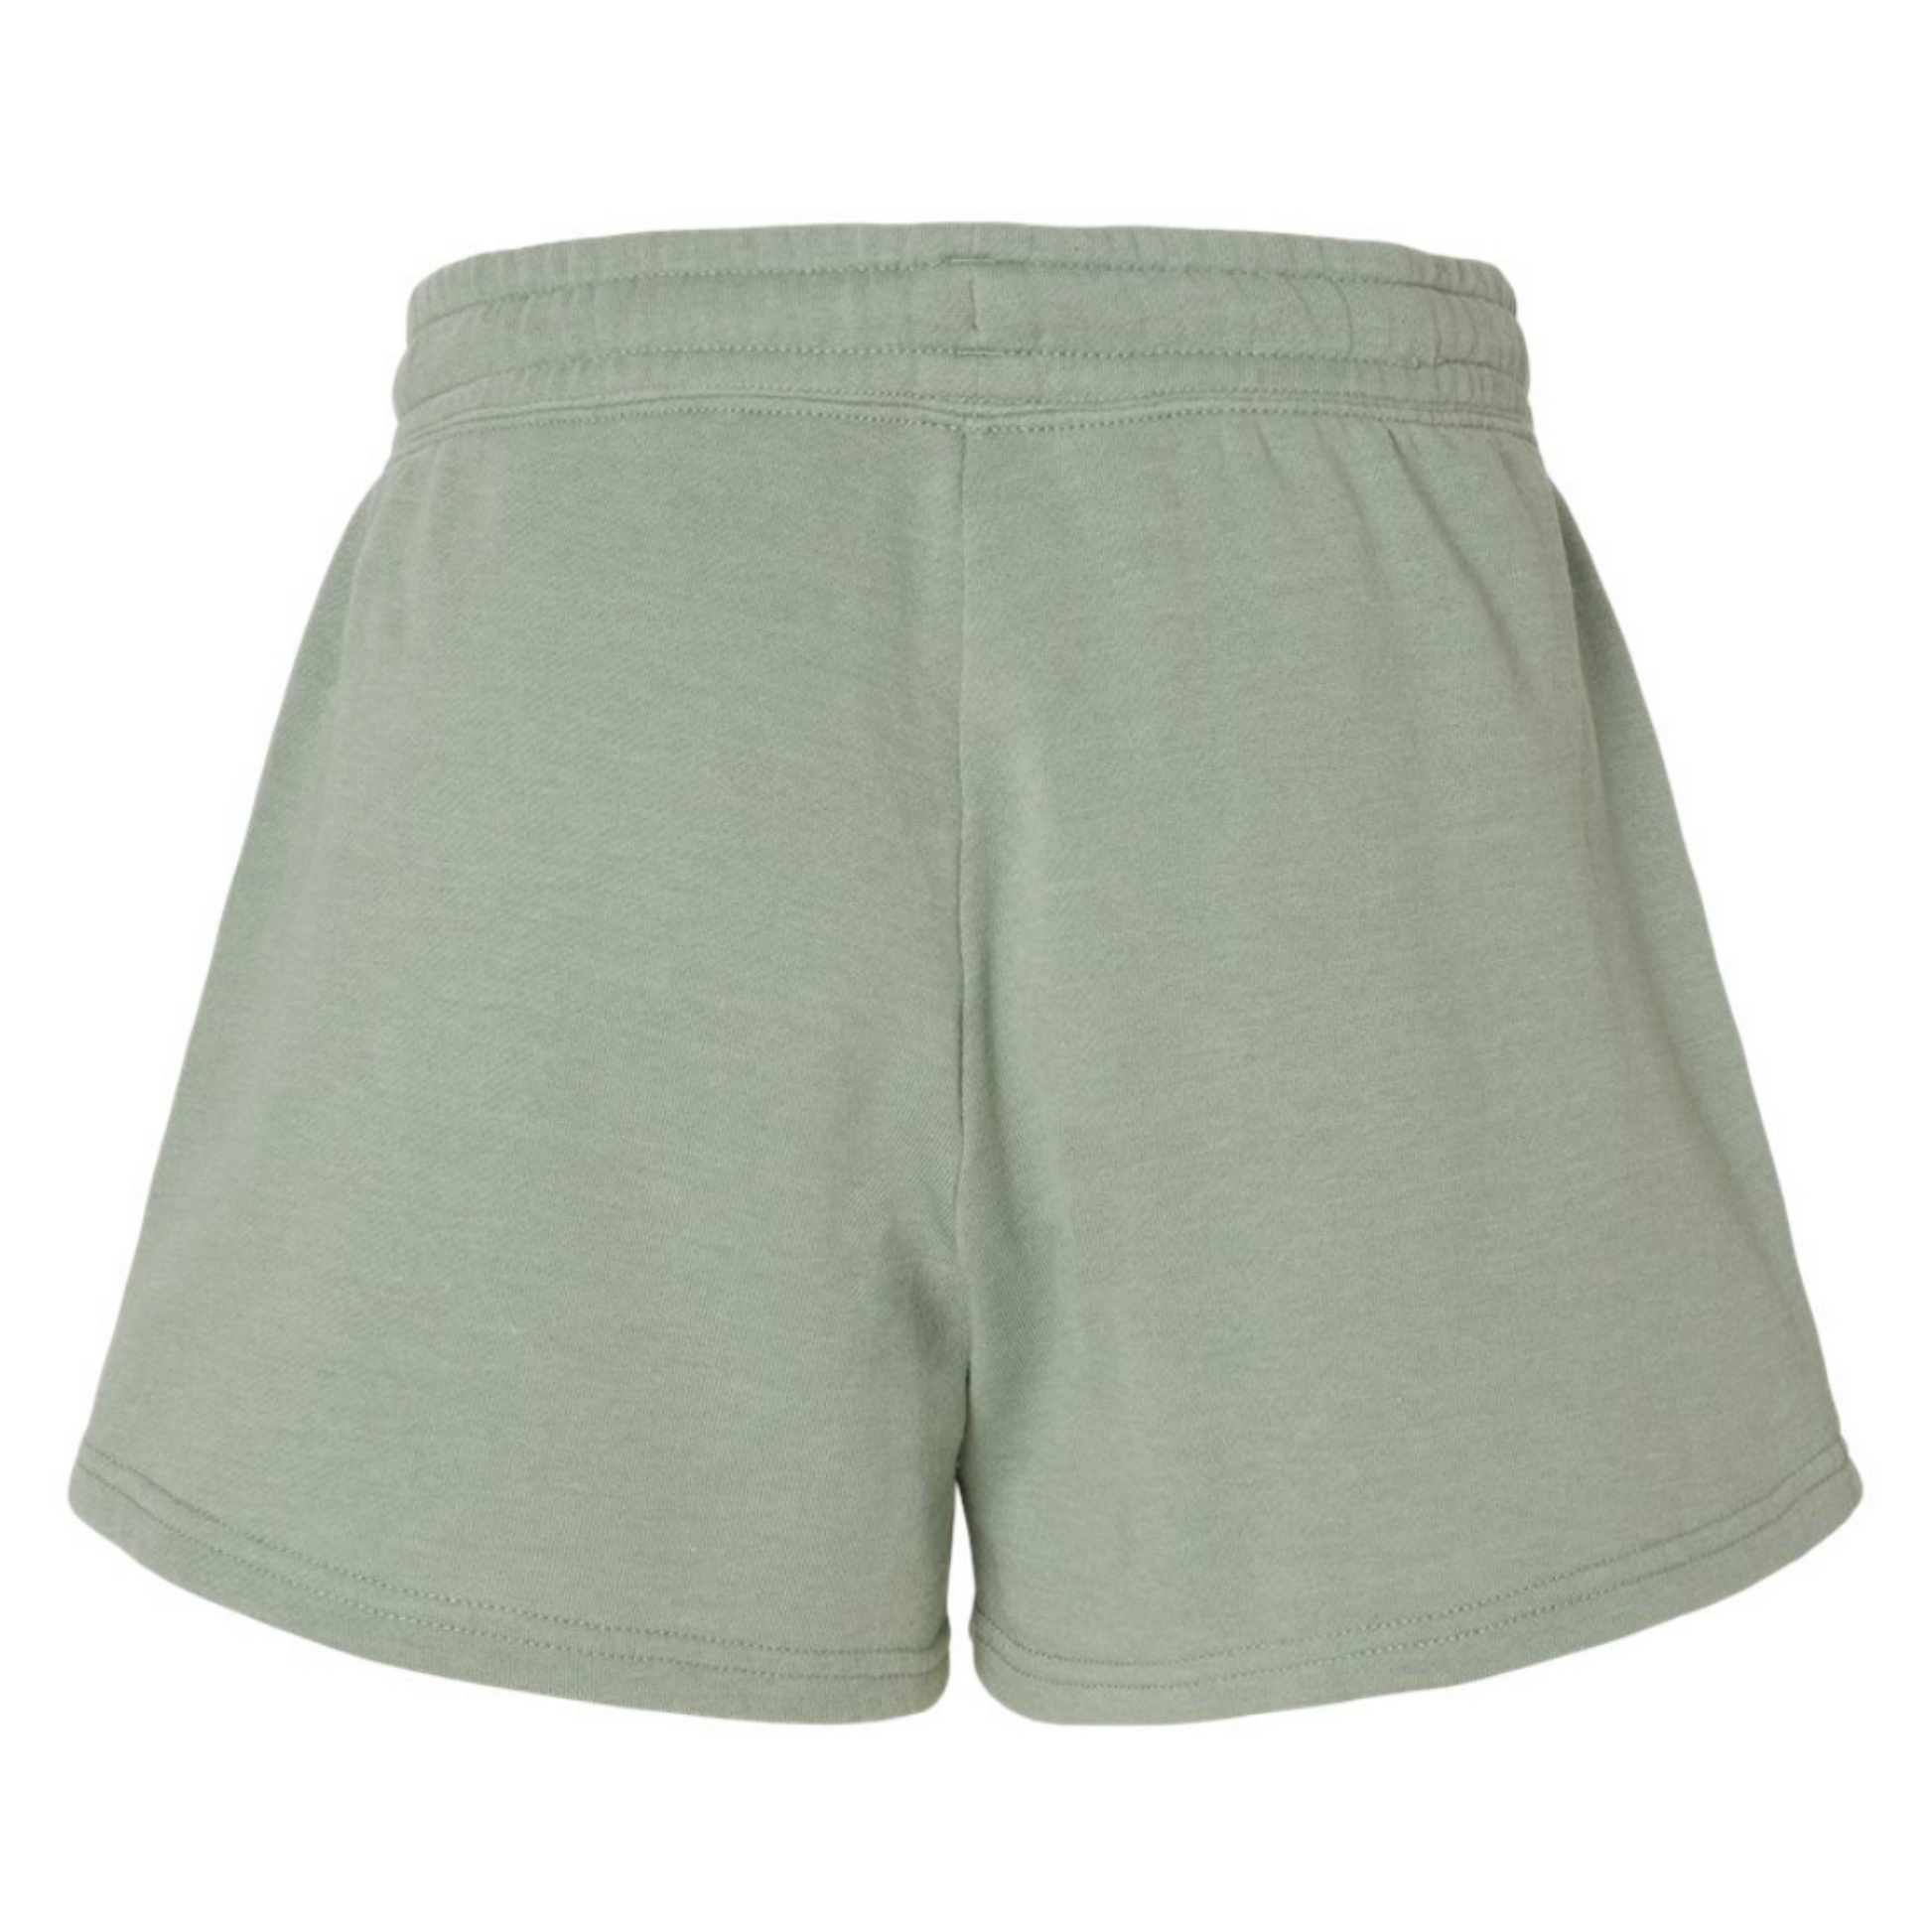 Lake Bum Shorts in a light mint green color with a "lake bum" saying on the right hand corner of the shorts. This is the back view of the shorts.